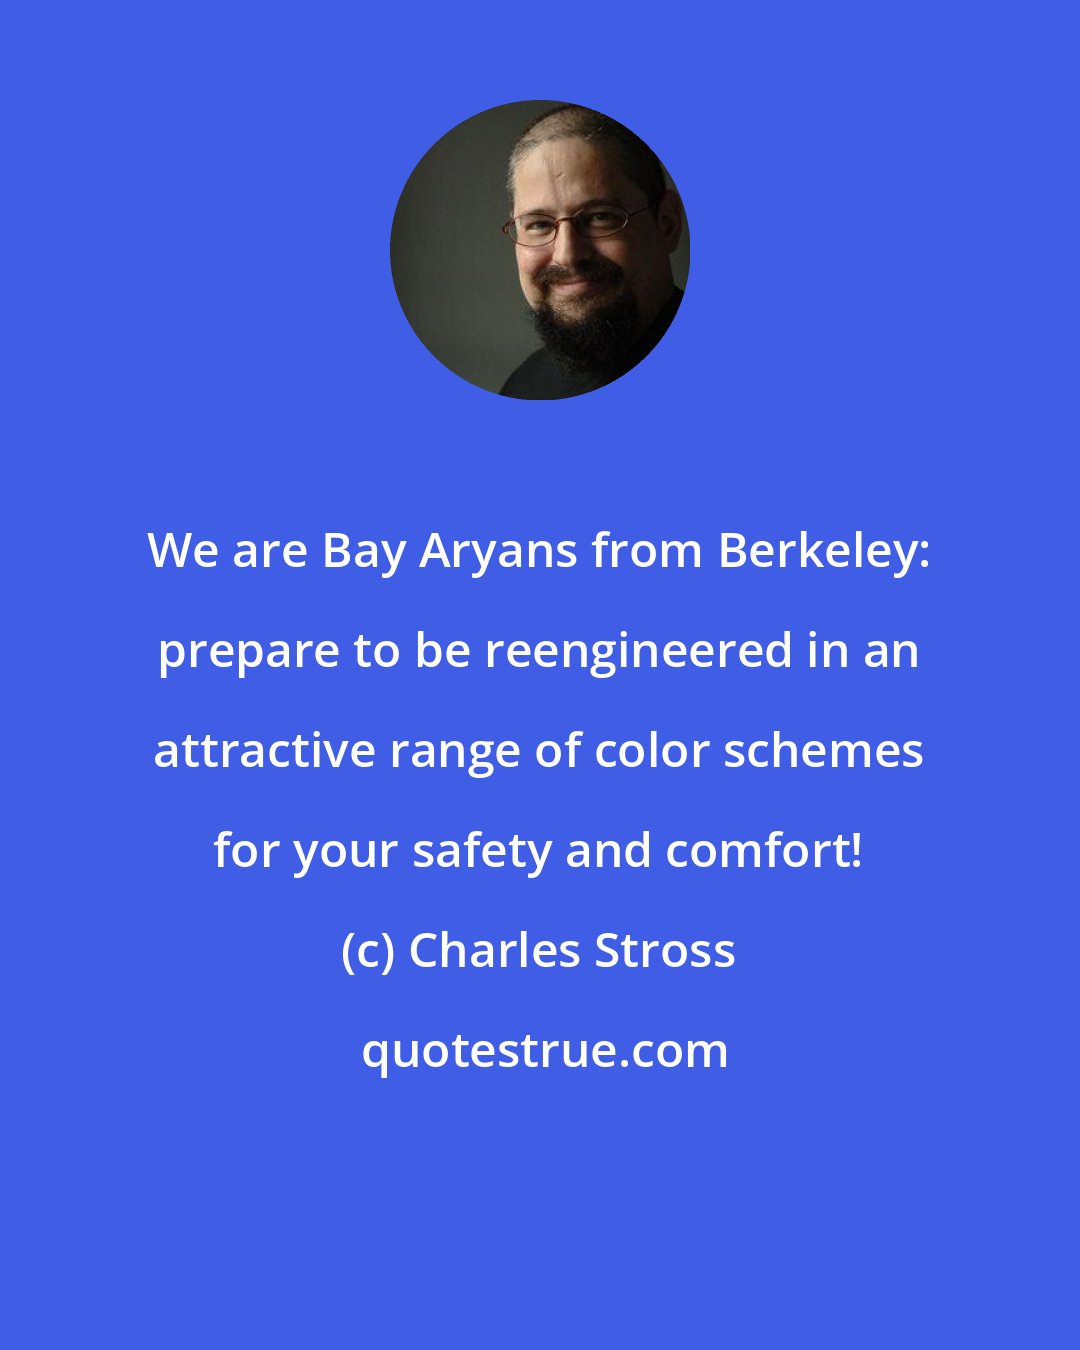 Charles Stross: We are Bay Aryans from Berkeley: prepare to be reengineered in an attractive range of color schemes for your safety and comfort!